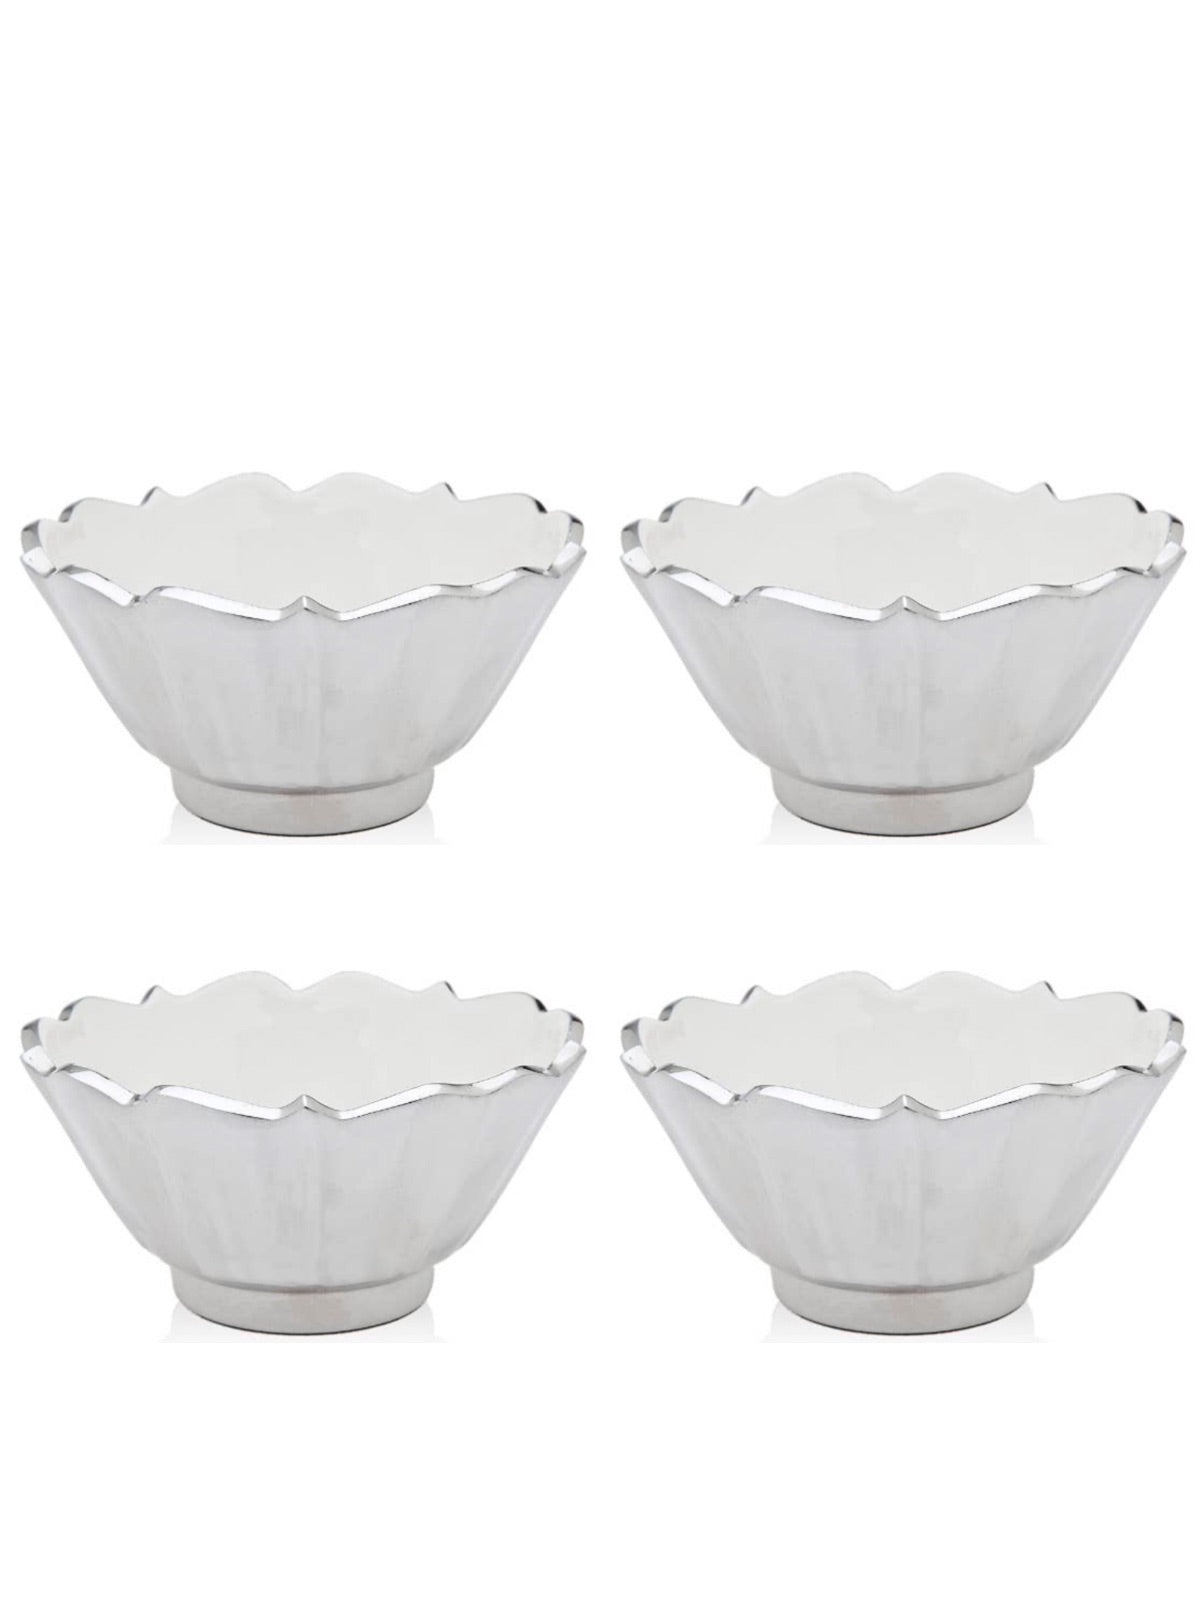 Boasting a simple design, the Netta Bowls bring casual elegance to every meal. This fabulous set includes 4 bowls and features beautiful colors for a crisp sense of elegance.